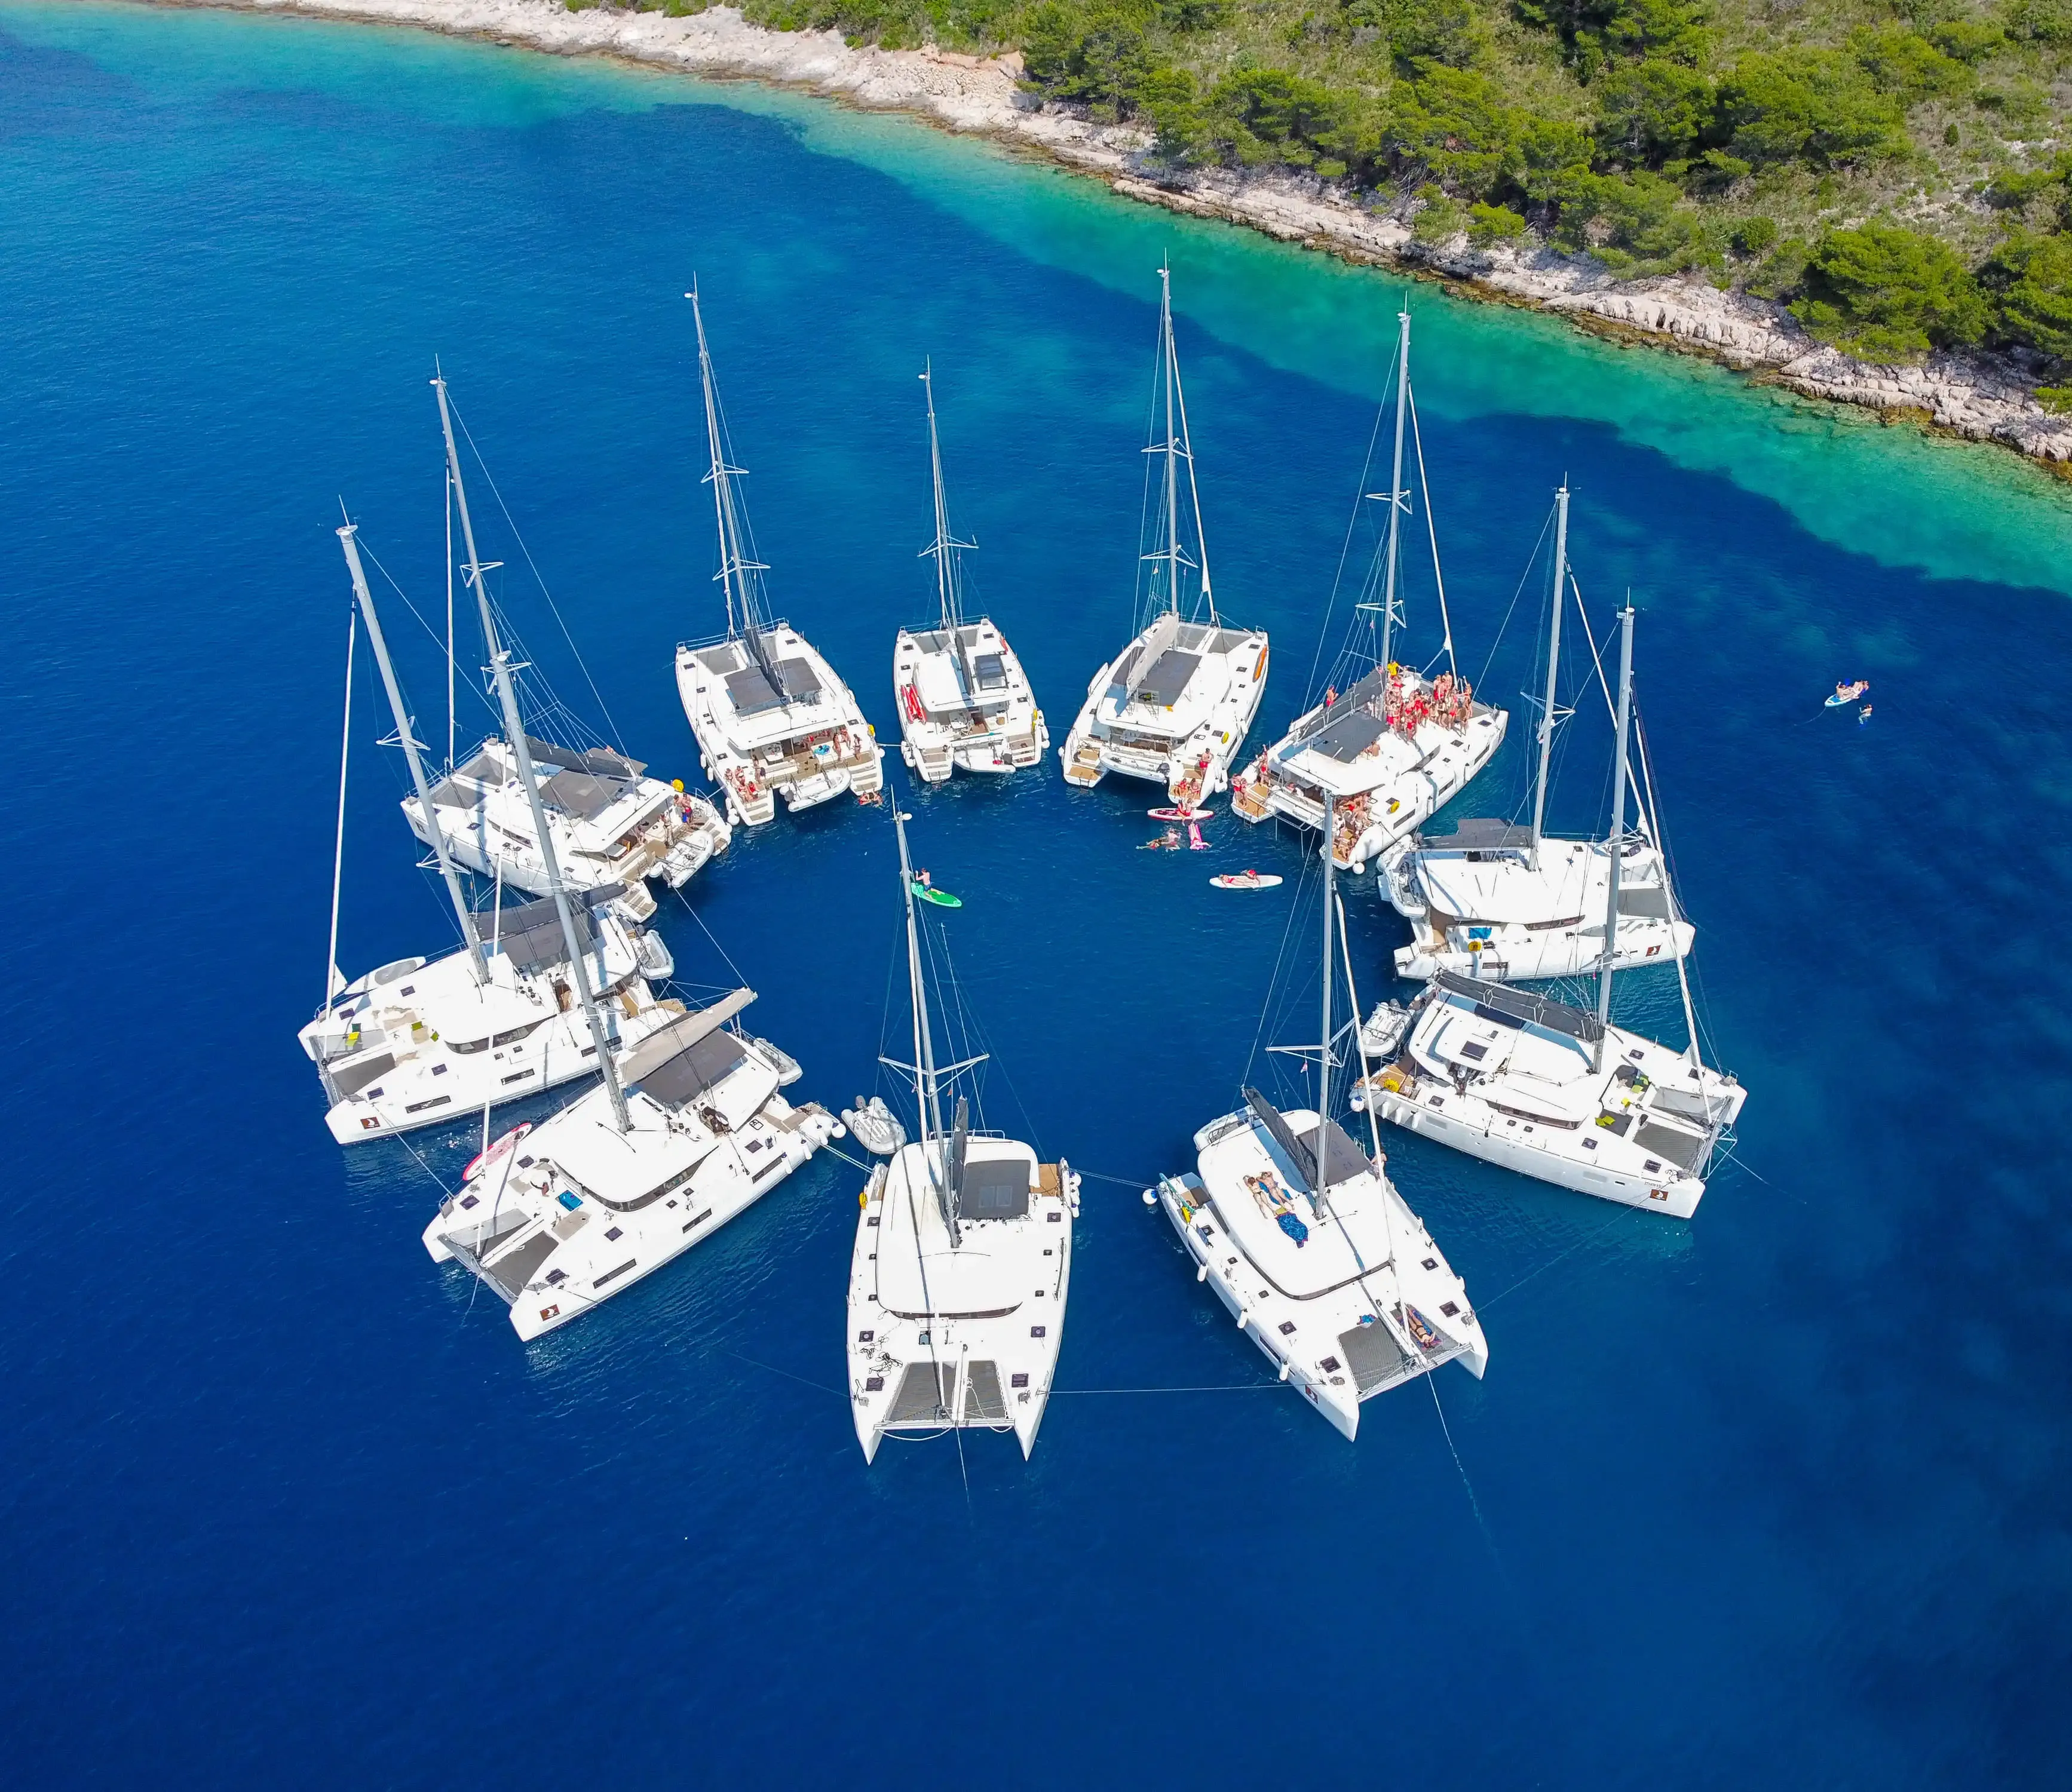 Catamaran fleet, private secluded yacht party